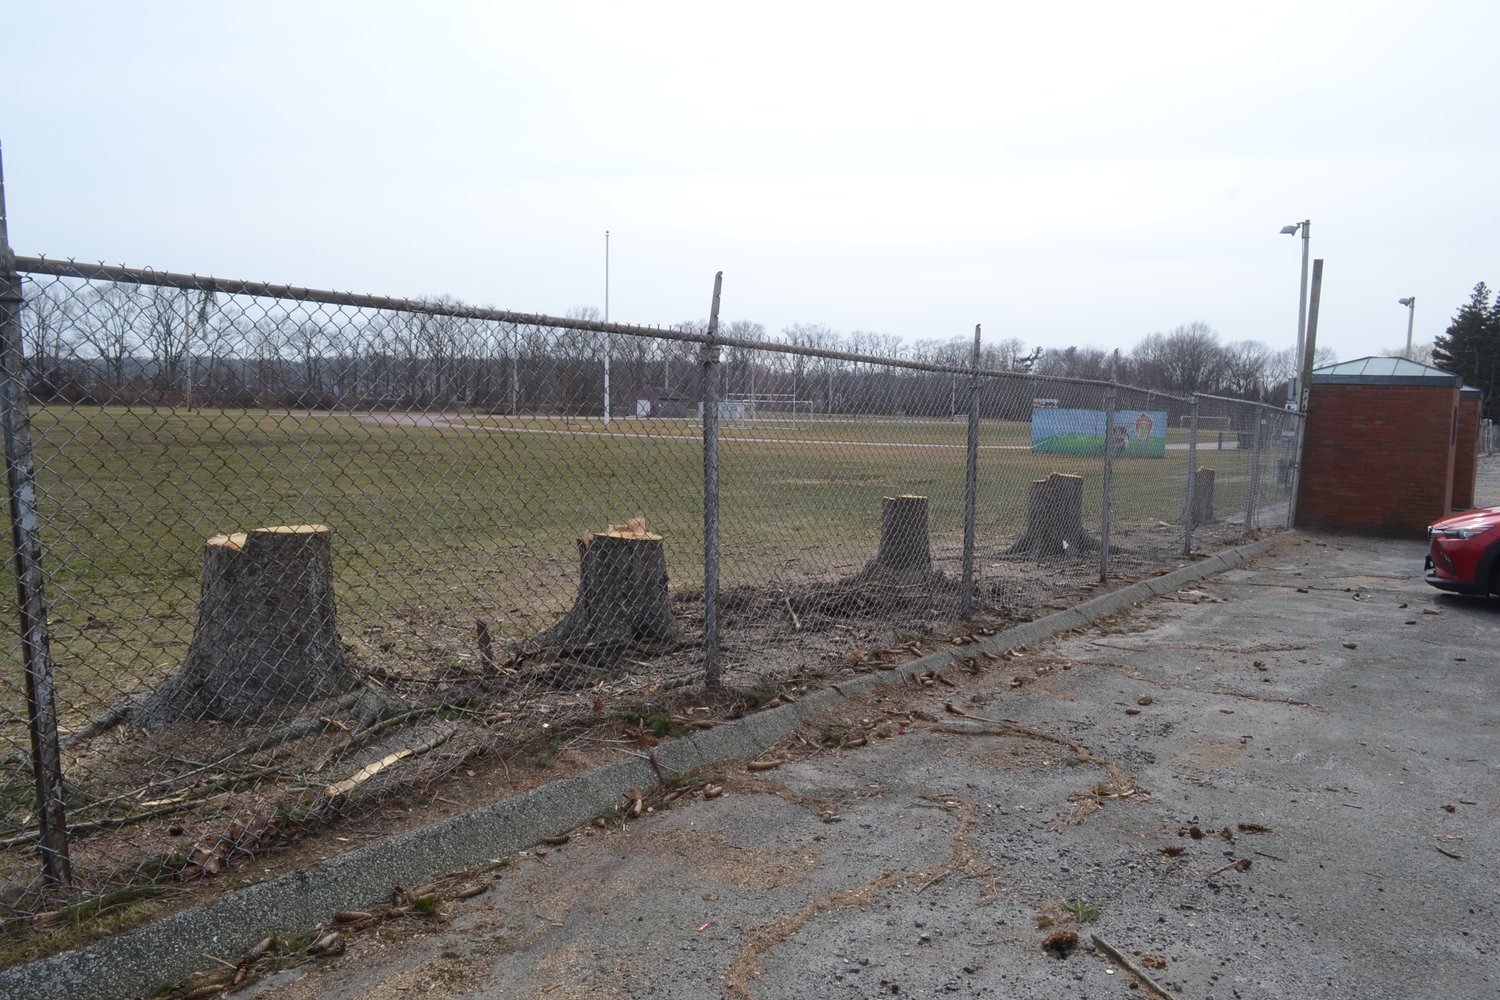 A line of trees near the soccer field at KMS were noticed to have been cut down recently, prompting some residents to ask why.